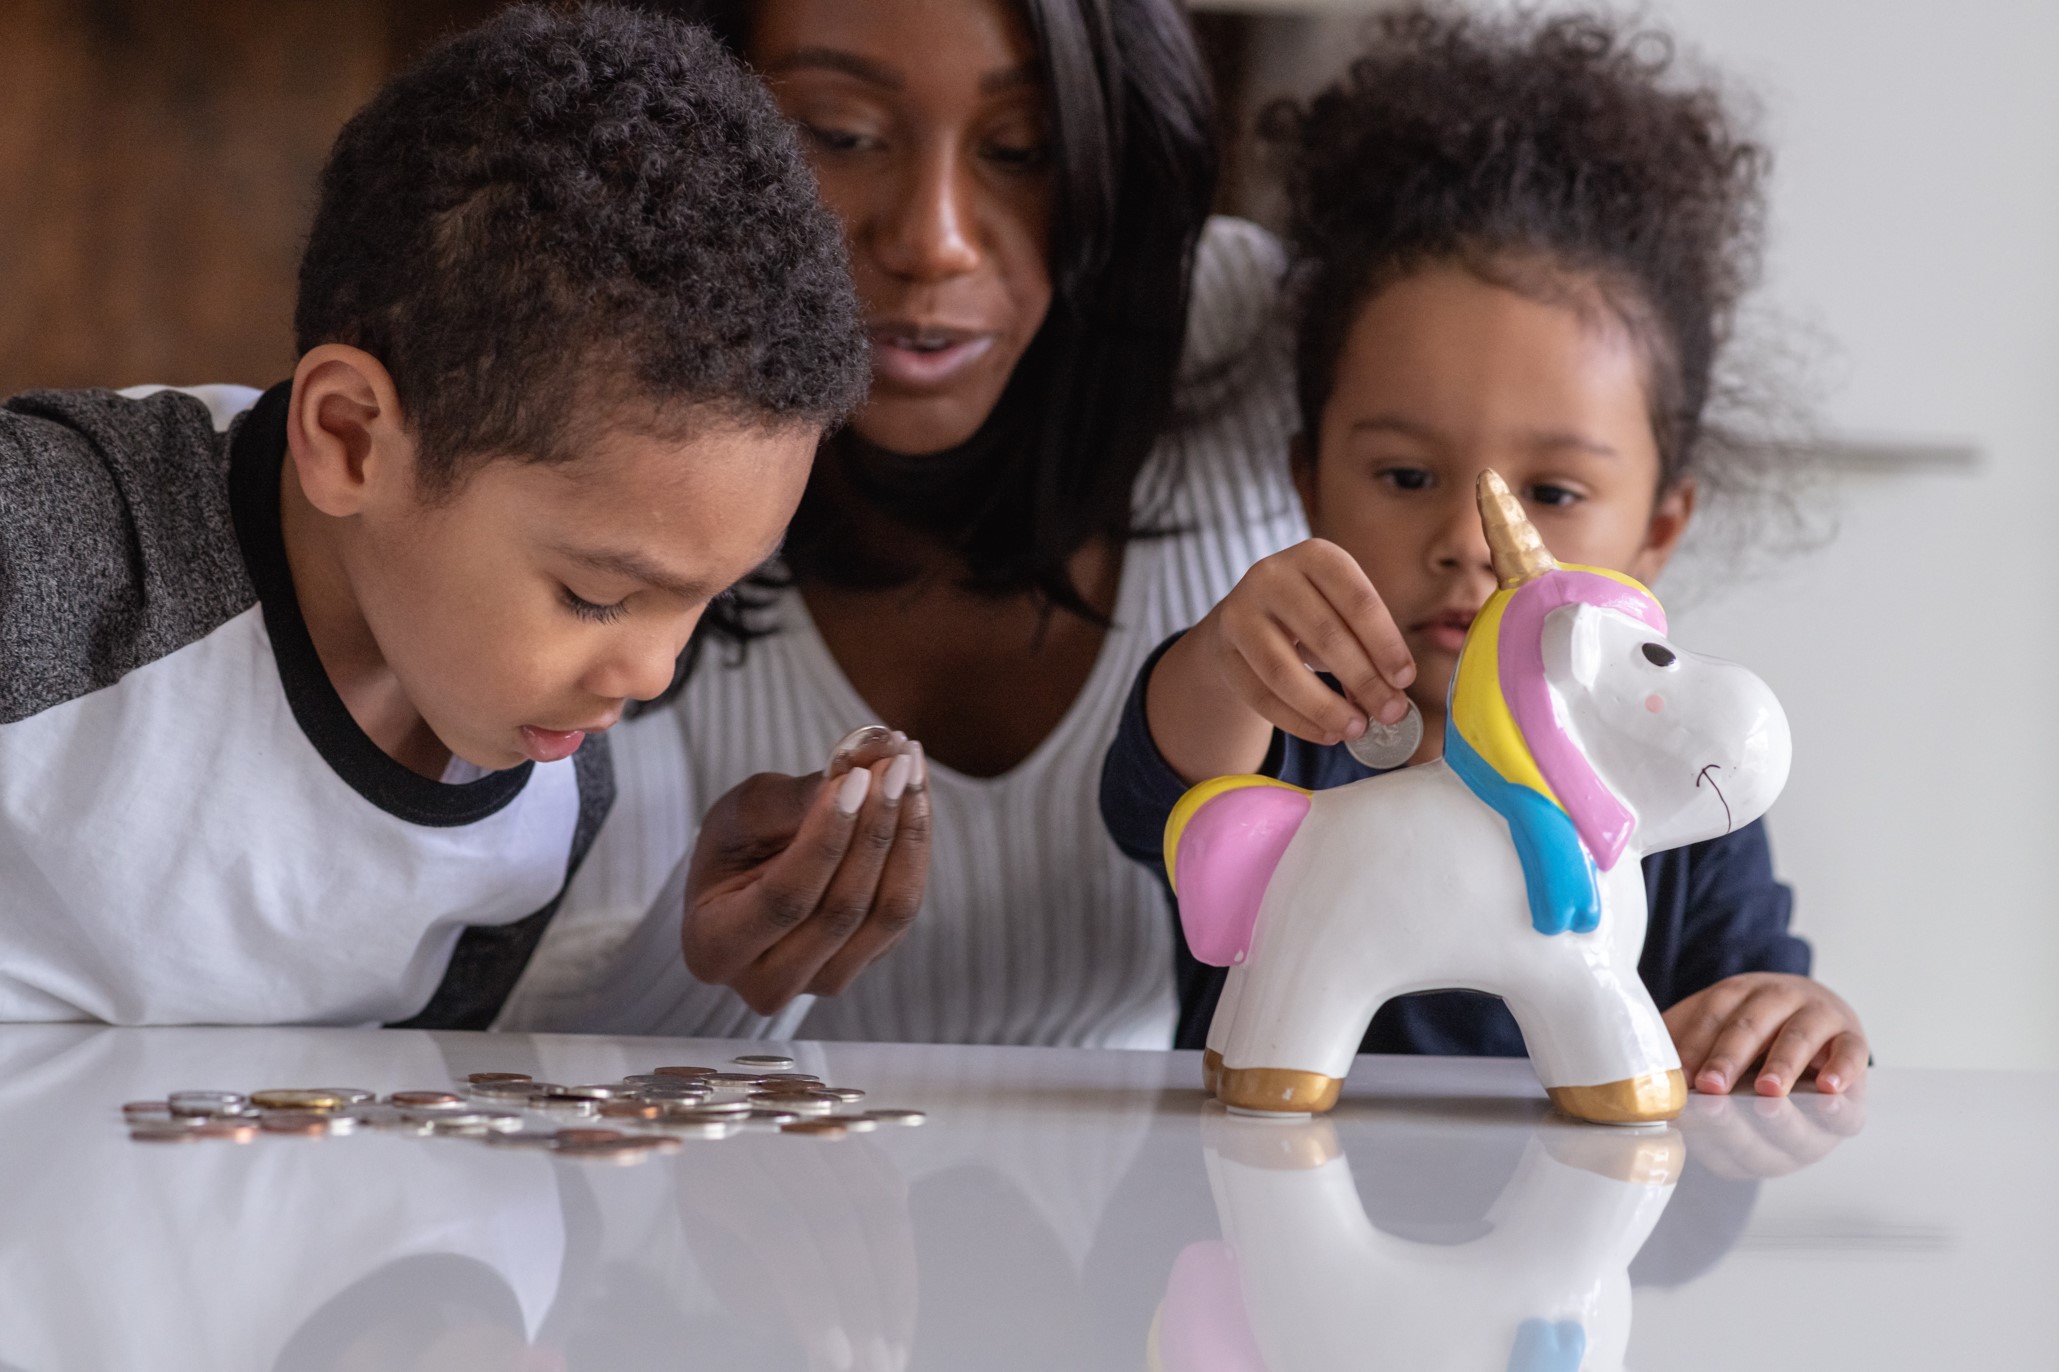 mom with young daughter and son putting coins into a unicorn piggy bank